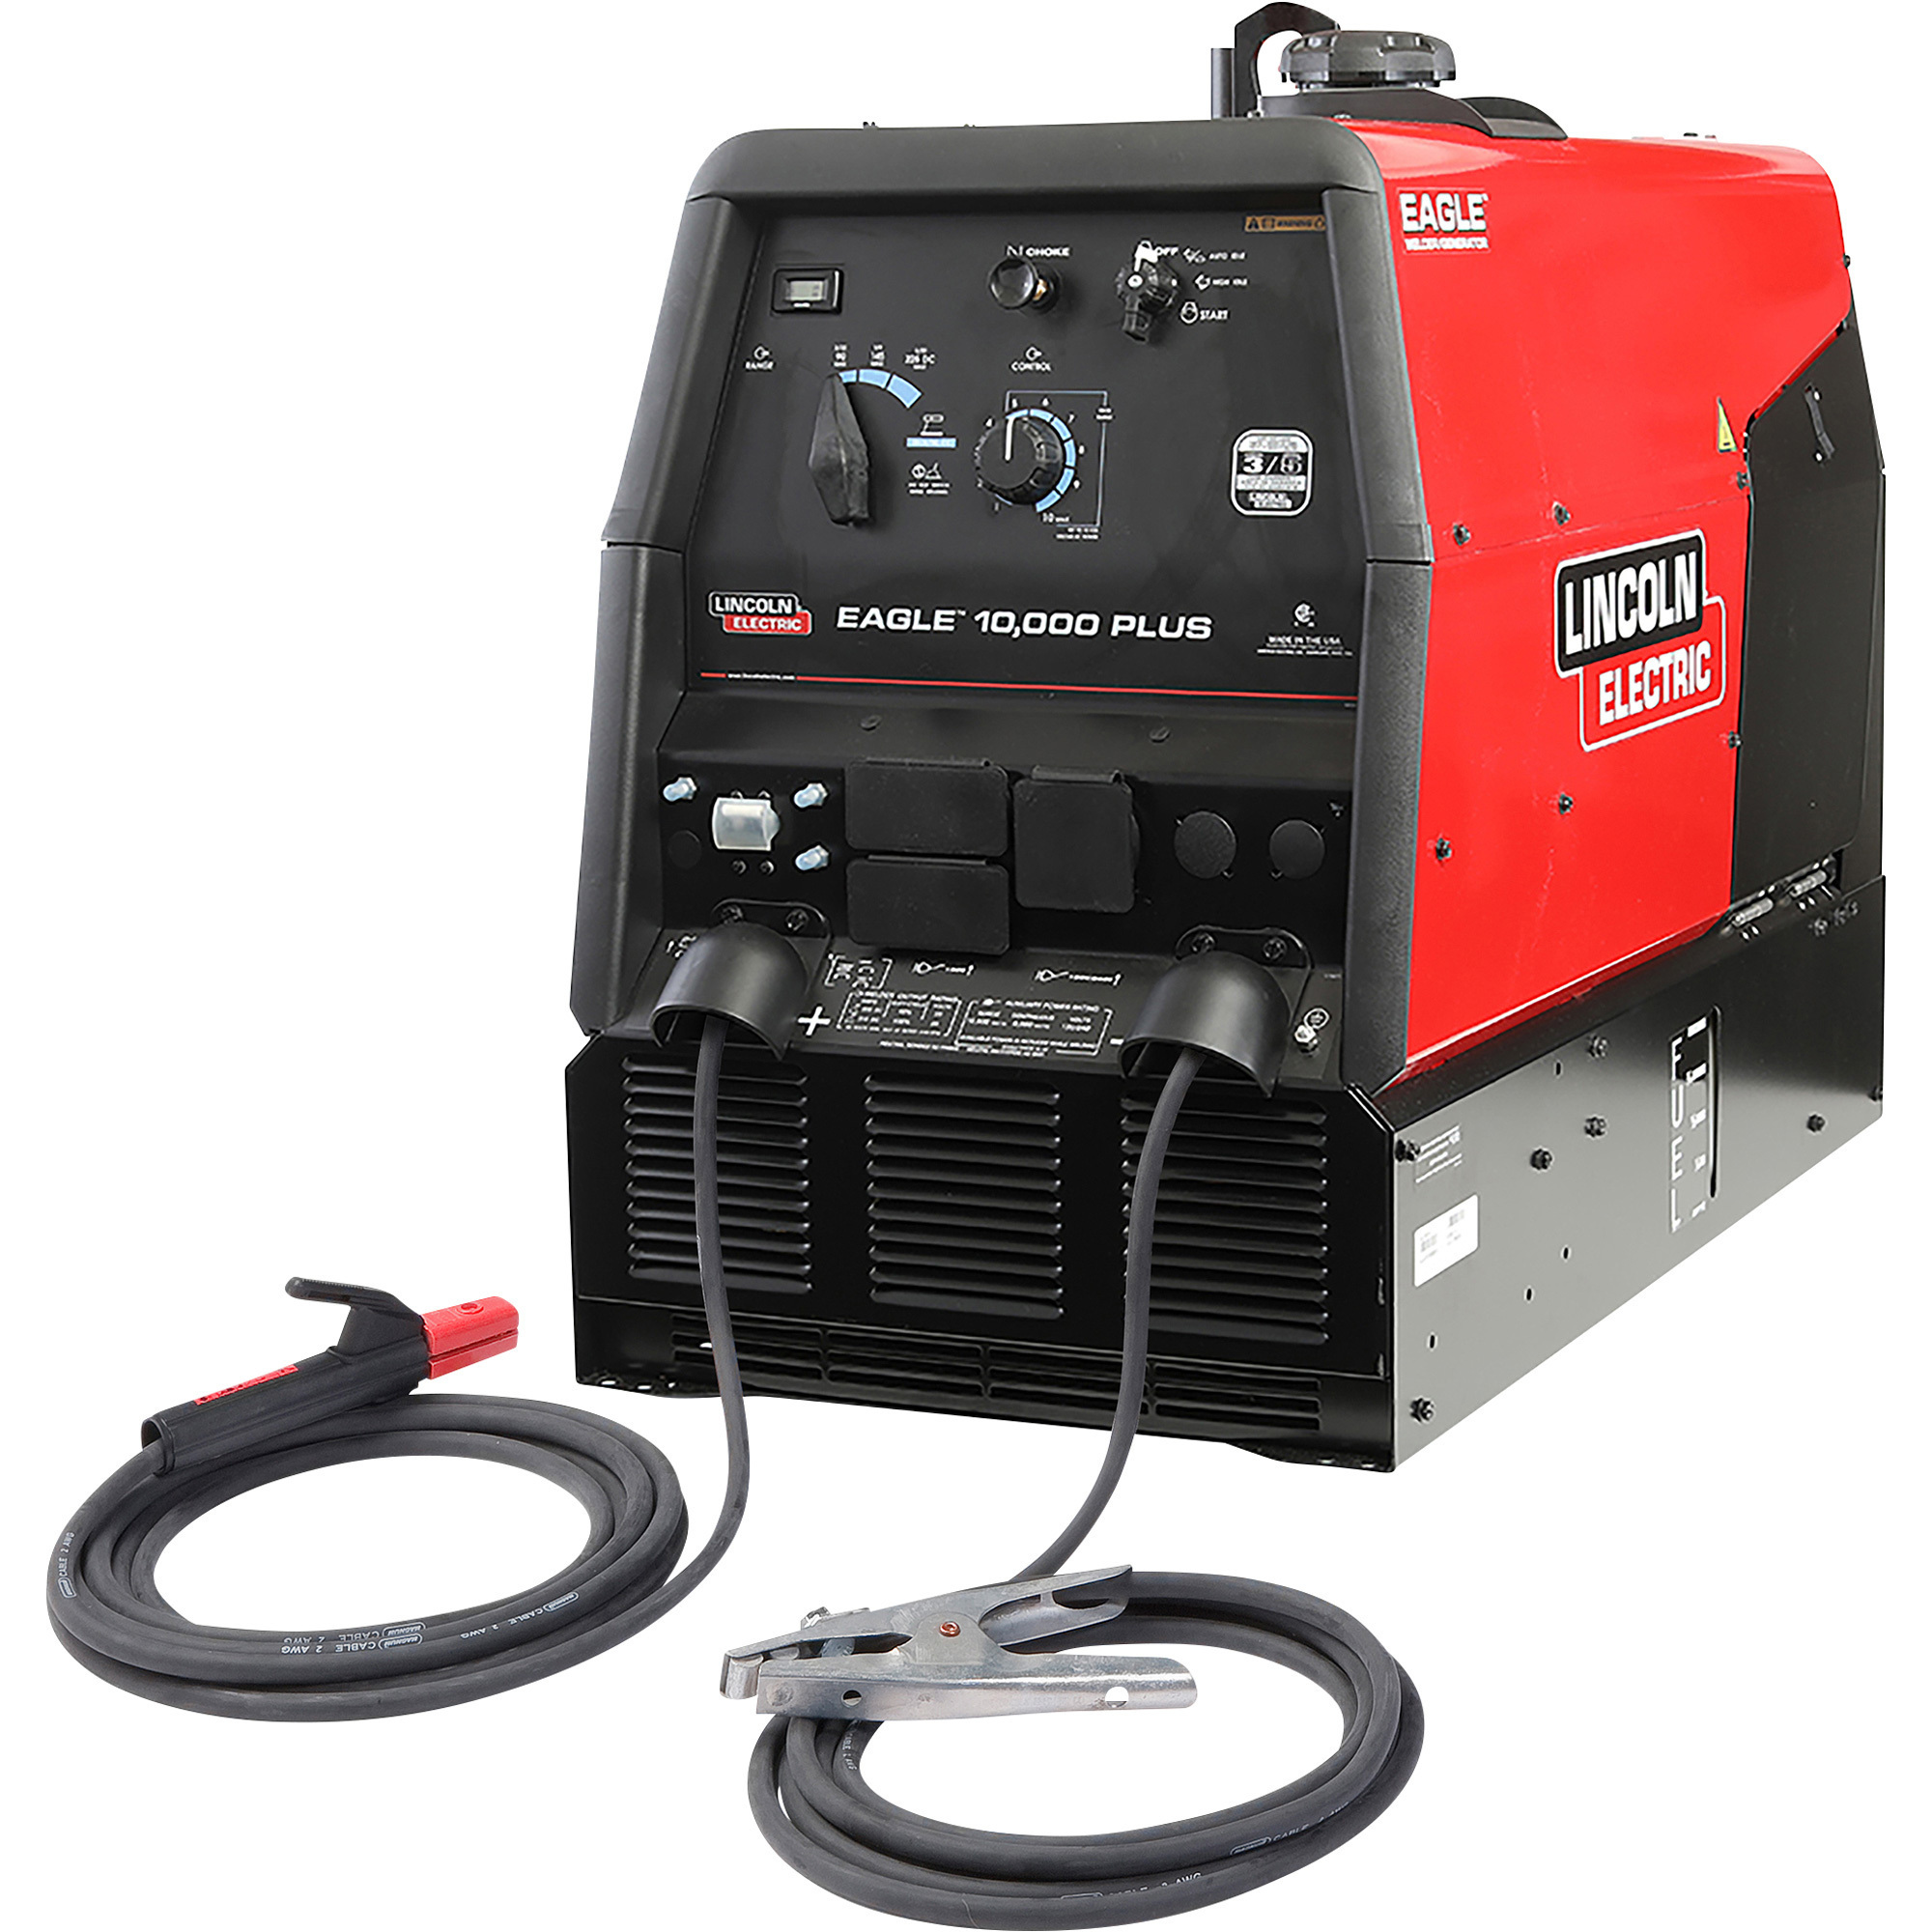 Lincoln Electric Eagle 10,000 Plus Engine Driven DC Arc Welder/AC Generator with Electric Start, 50-225 Amp DC Output, 120/240 Volt, 10,000 Watt AC -  K2343-4